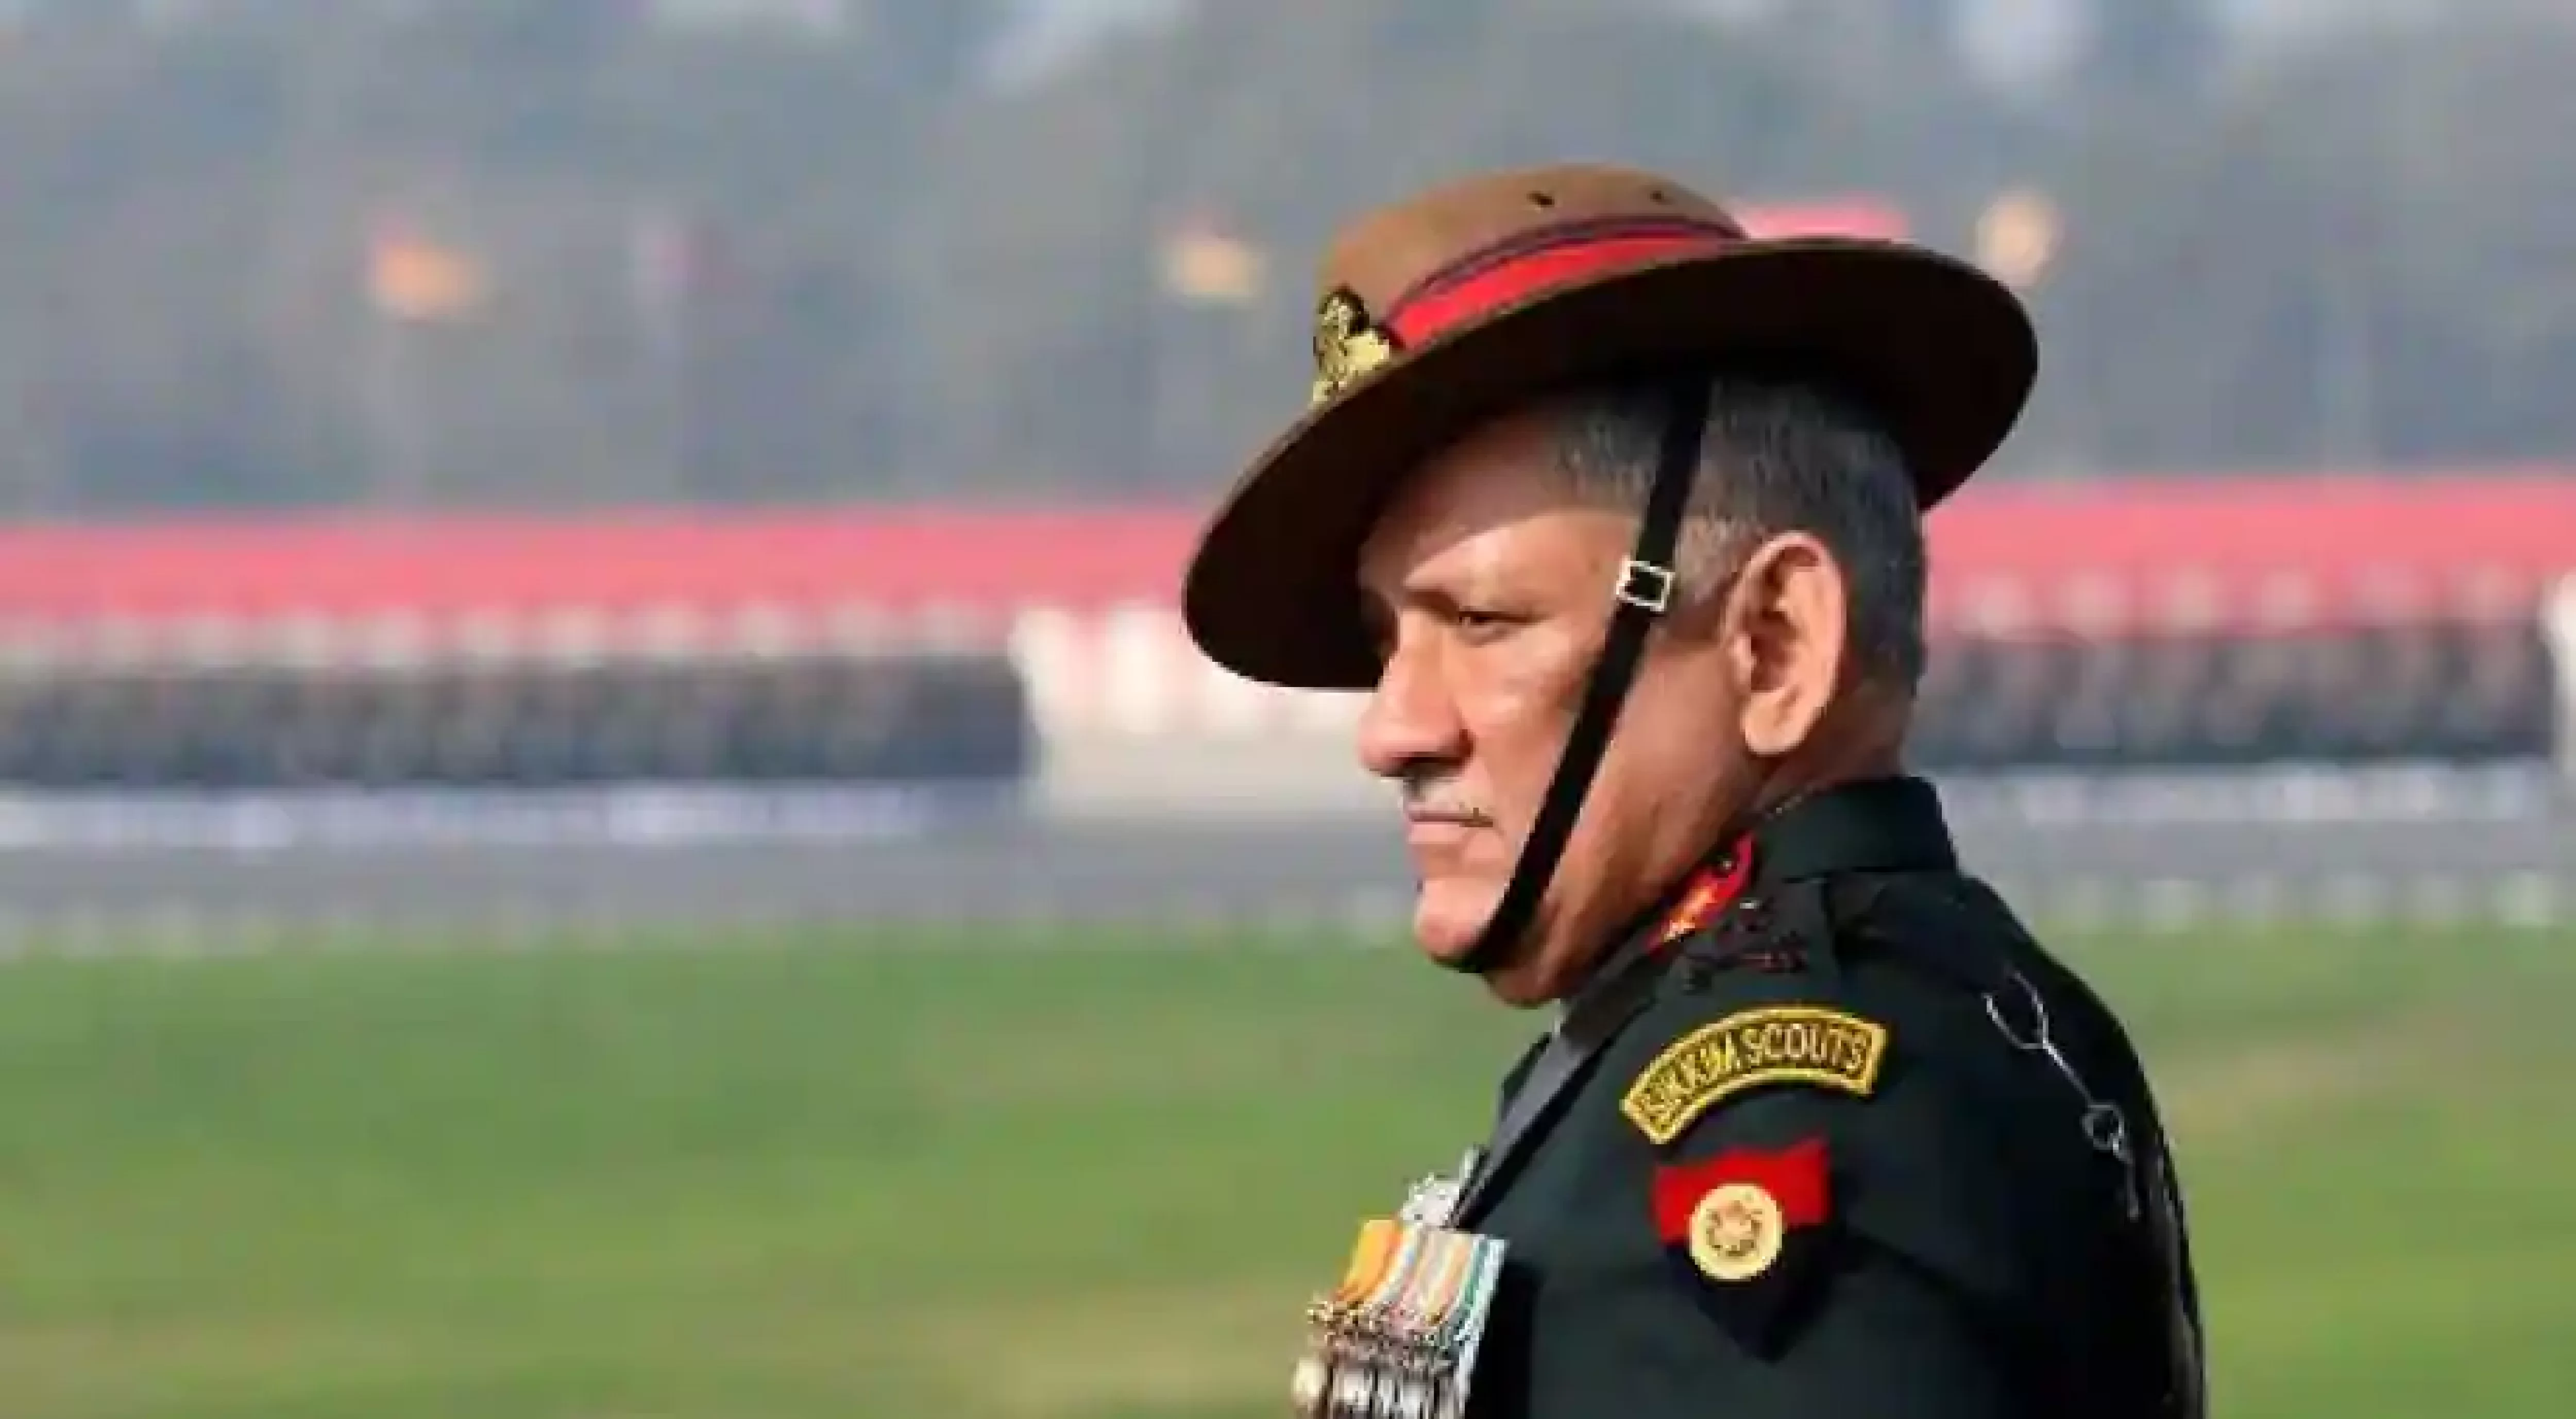 Exclusive: For India, China a bigger security threat than Pakistan, Chief of Defence Staff General Bipin Rawat tells WION